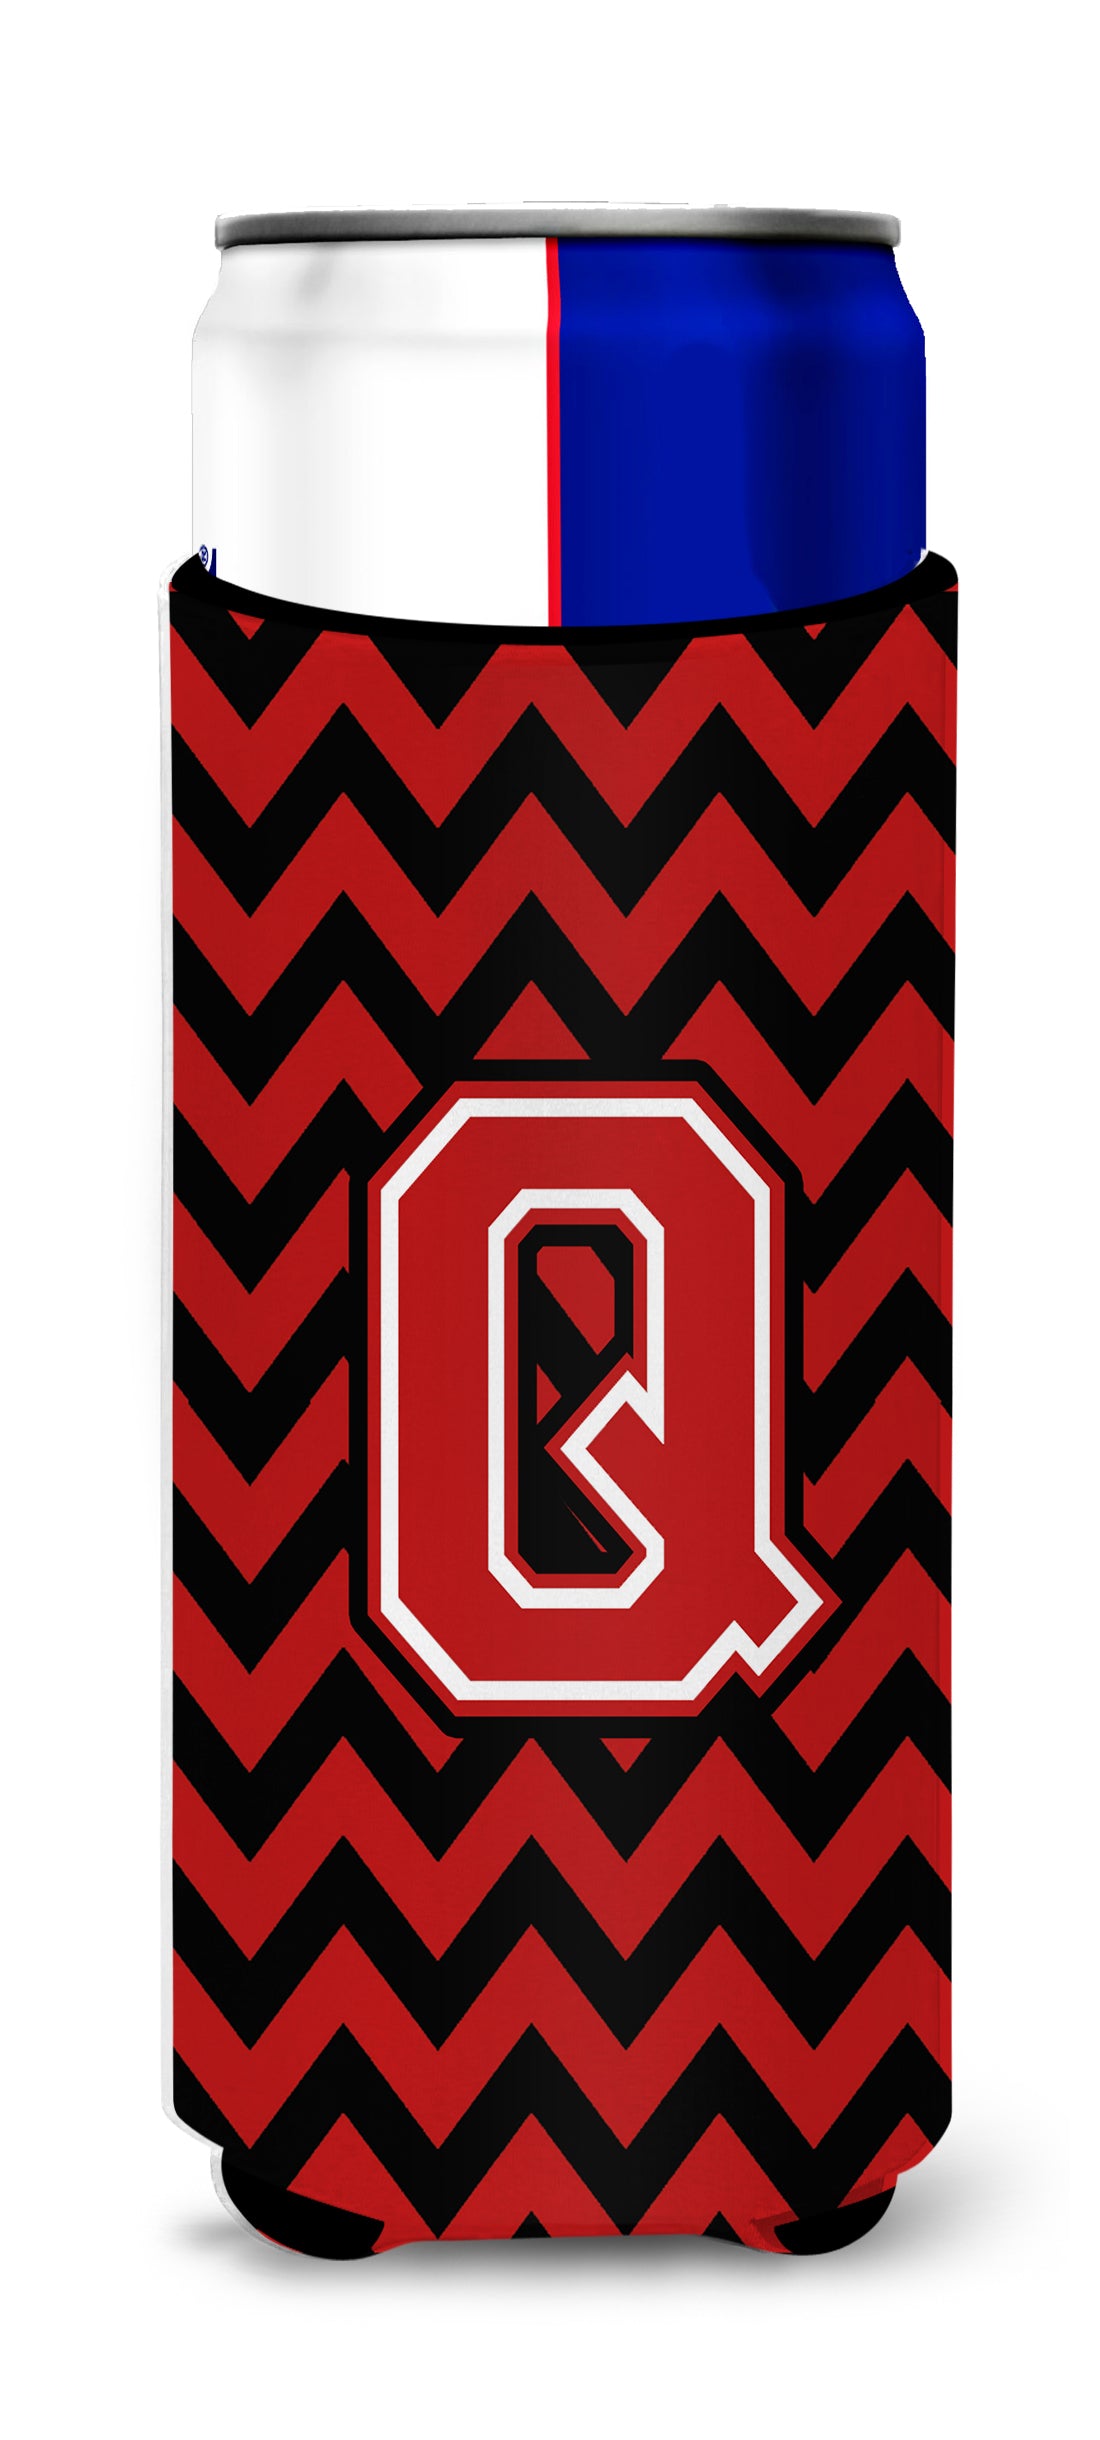 Letter Q Chevron Black and Red   Ultra Beverage Insulators for slim cans CJ1047-QMUK.